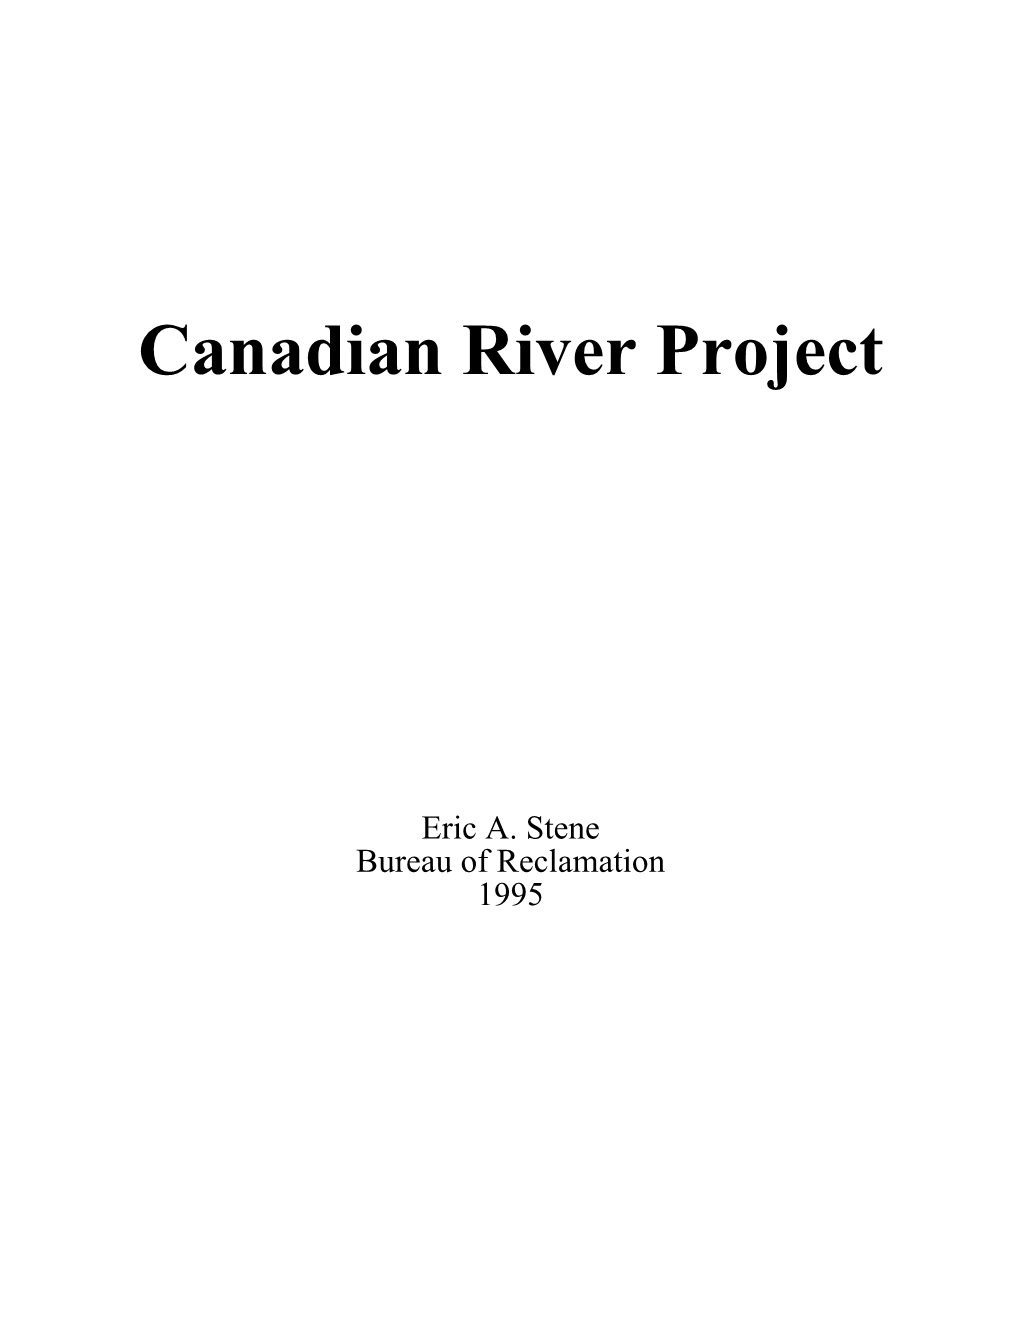 Canadian River Project, Texas, January 1954, 29-32; Water and Power Resources, Project Data, 108